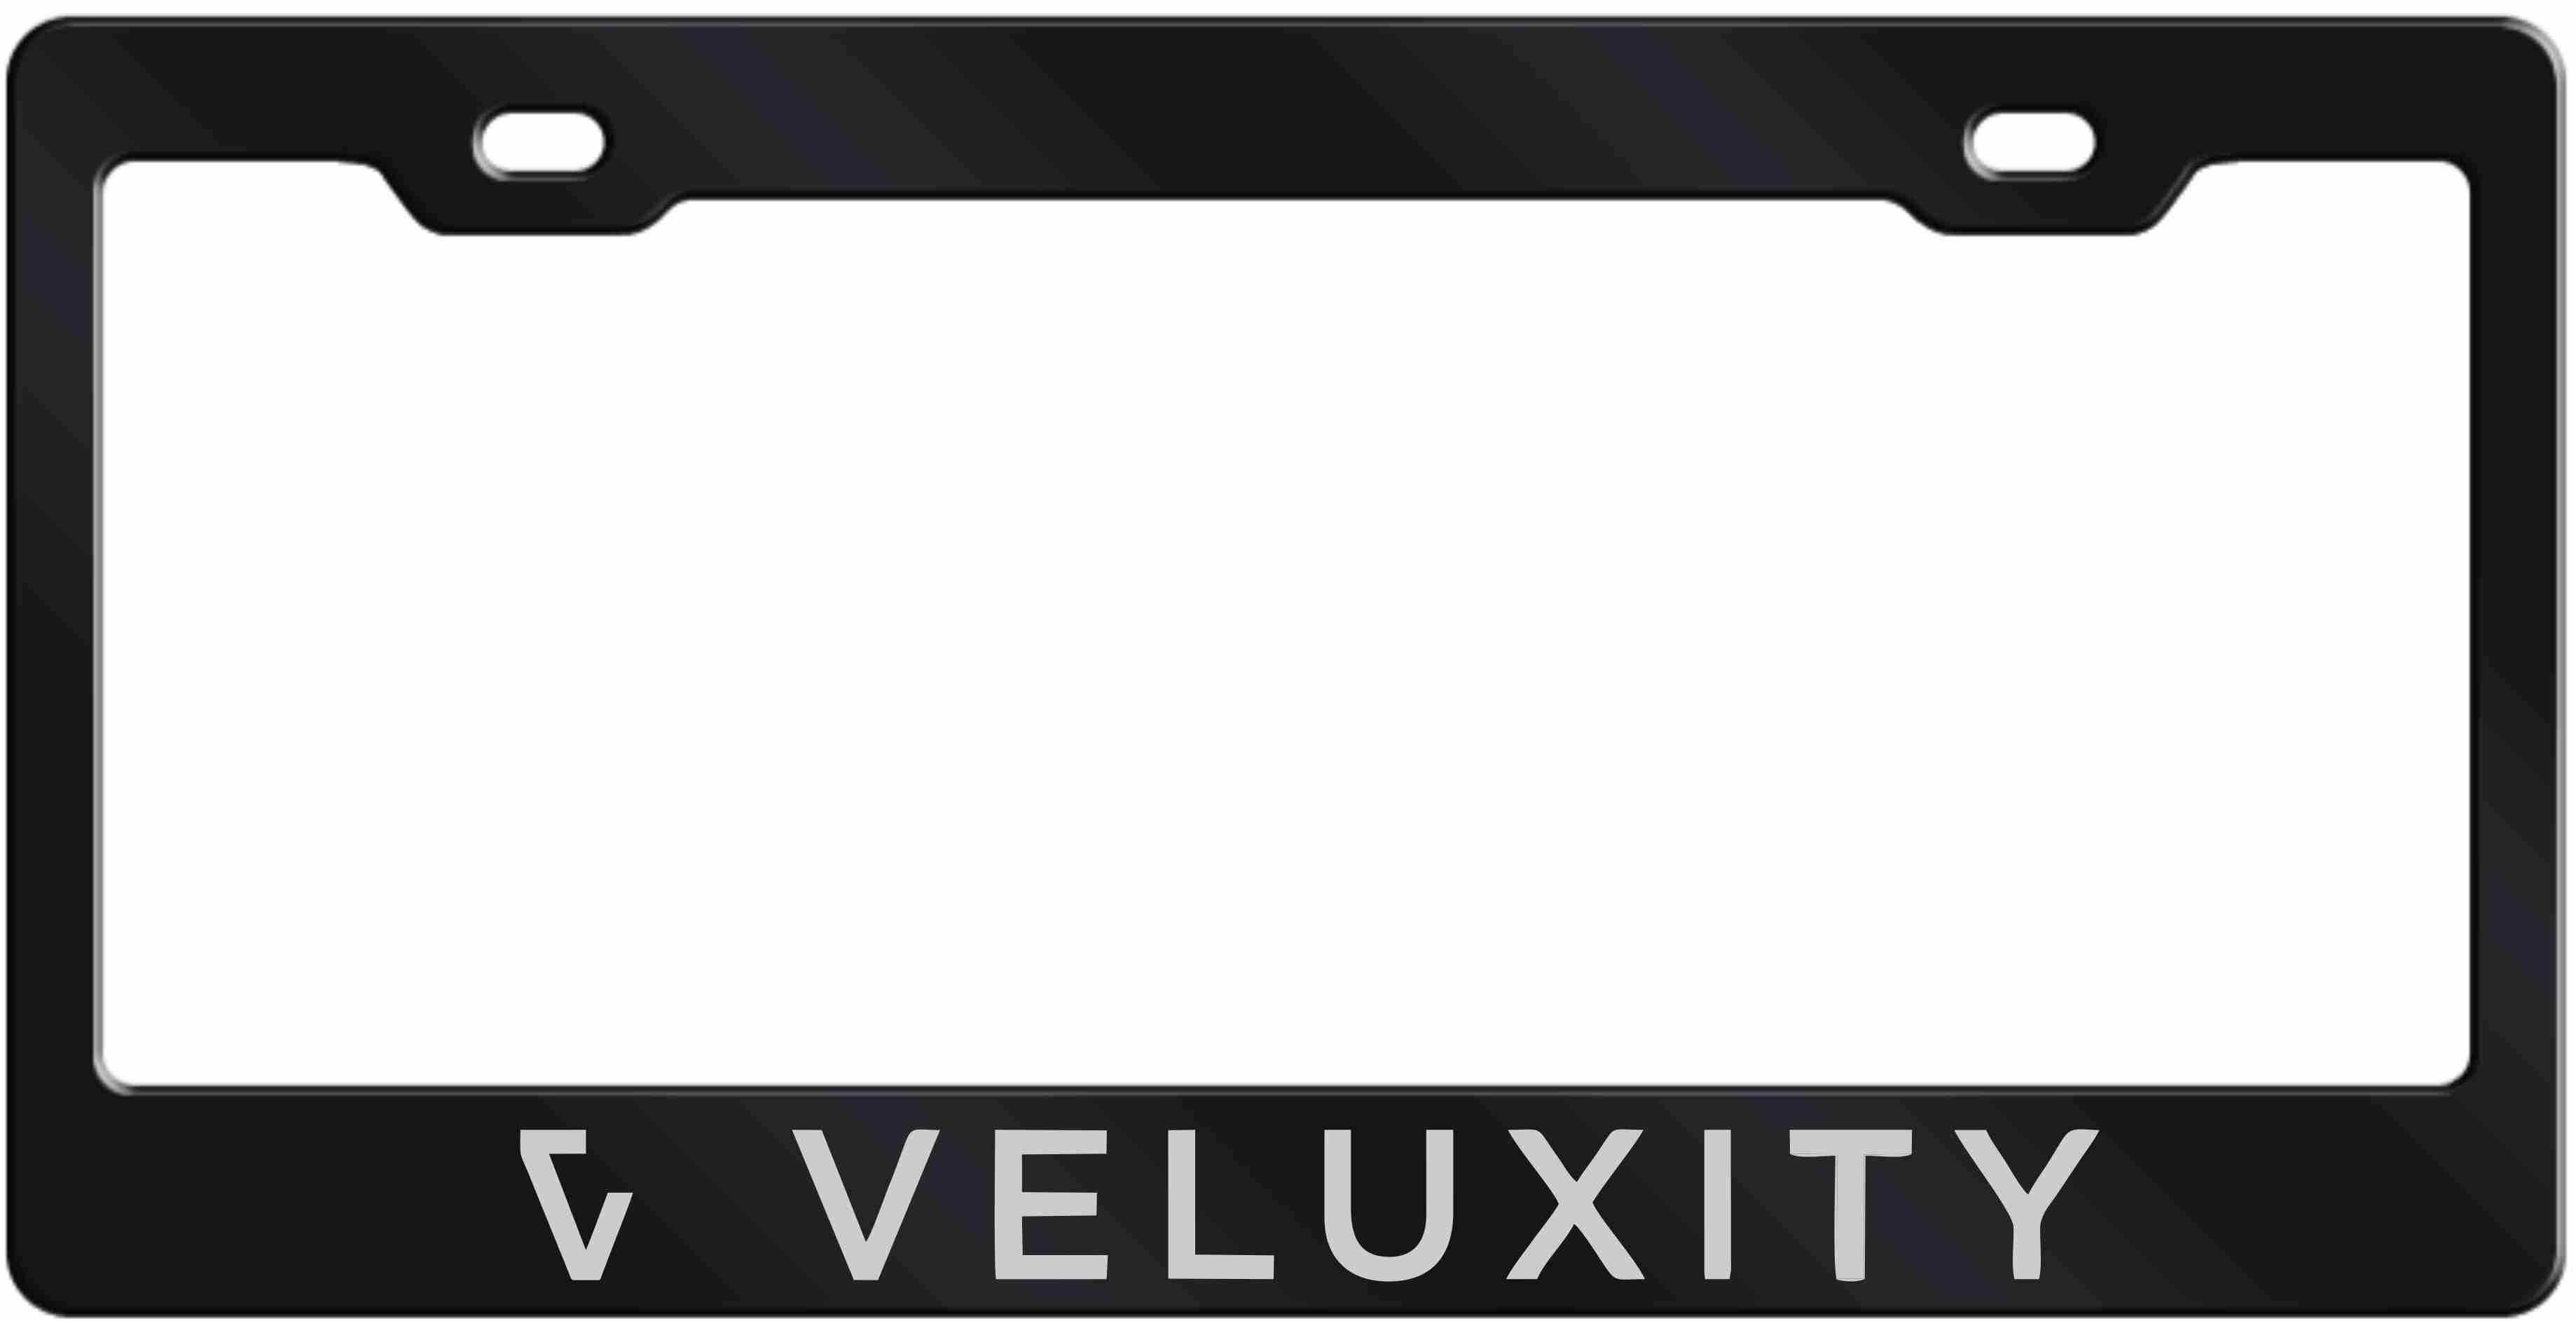 Veluxity - Anodized Aluminum License Plate Frame